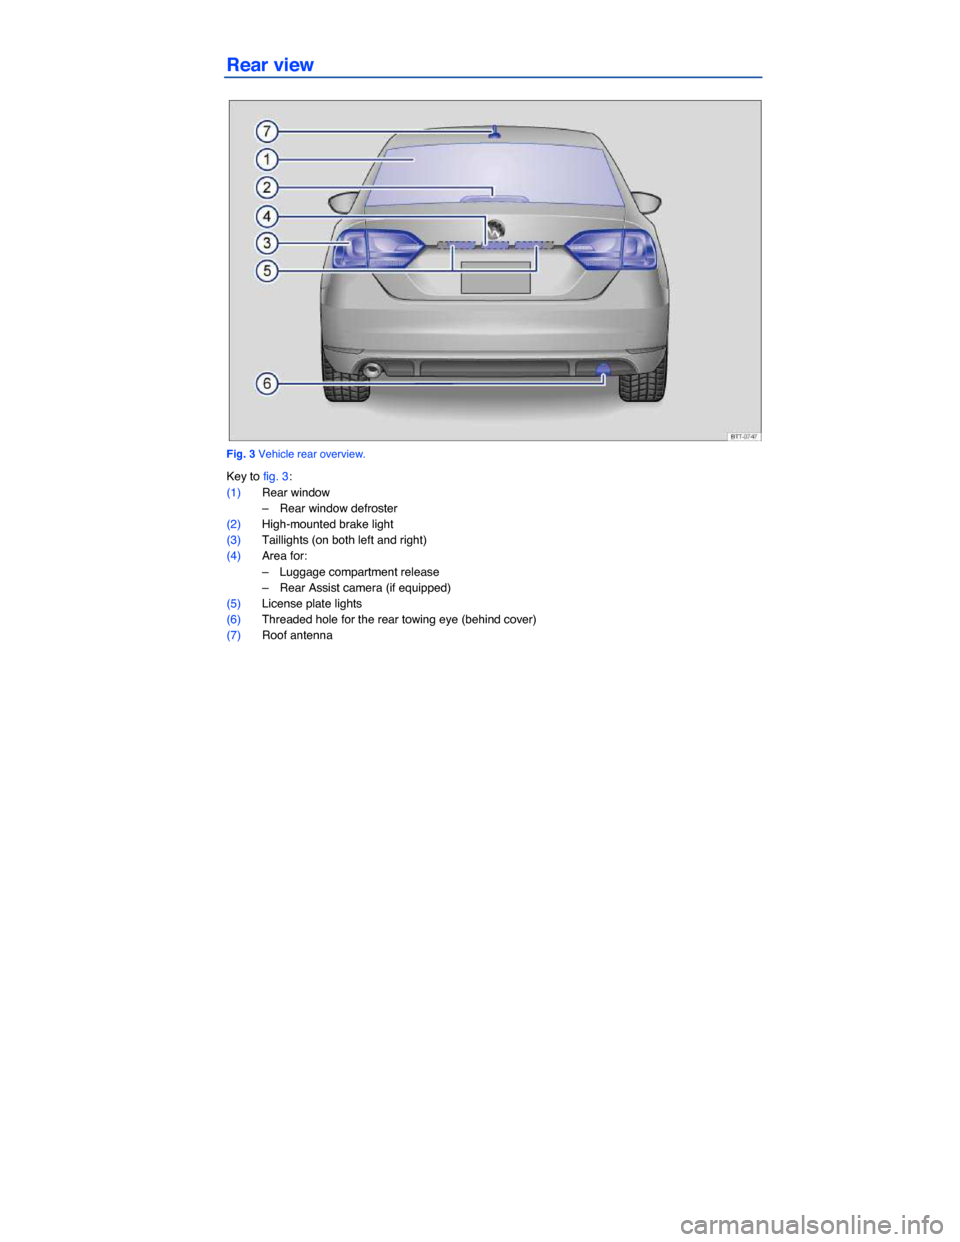 VOLKSWAGEN JETTA GLI 2014 1B / 6.G Owners Manual  
Rear view 
 
Fig. 3 Vehicle rear overview. 
Key to fig. 3: 
(1) Rear window 
–  Rear window defroster  
(2) High-mounted brake light  
(3) Taillights (on both left and right)  
(4) Area for: 
– 